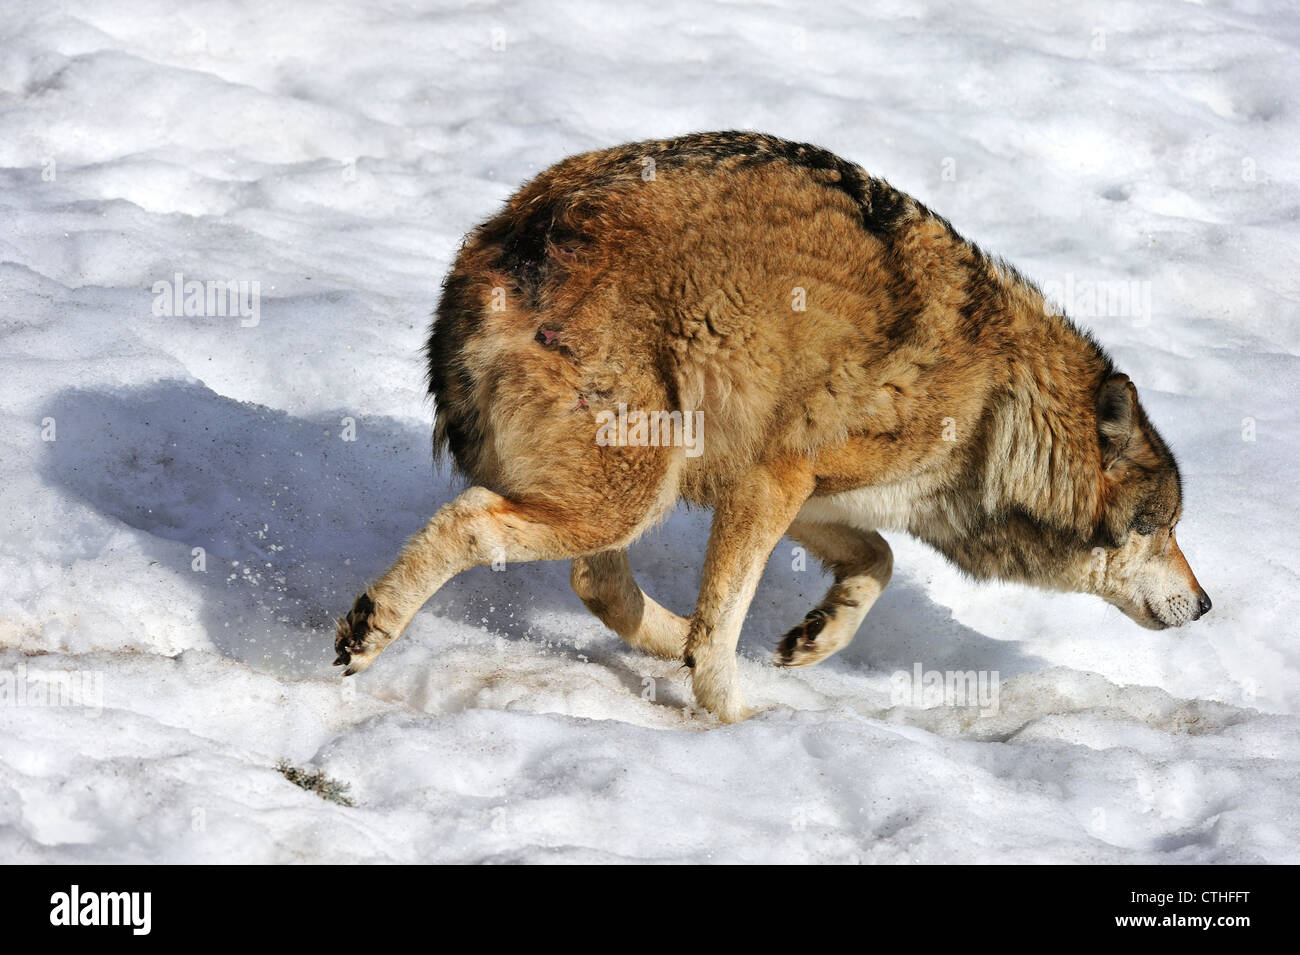 scared-subordinate-wolf-running-off-in-the-snow-showing-submissive-cthfft.jpg